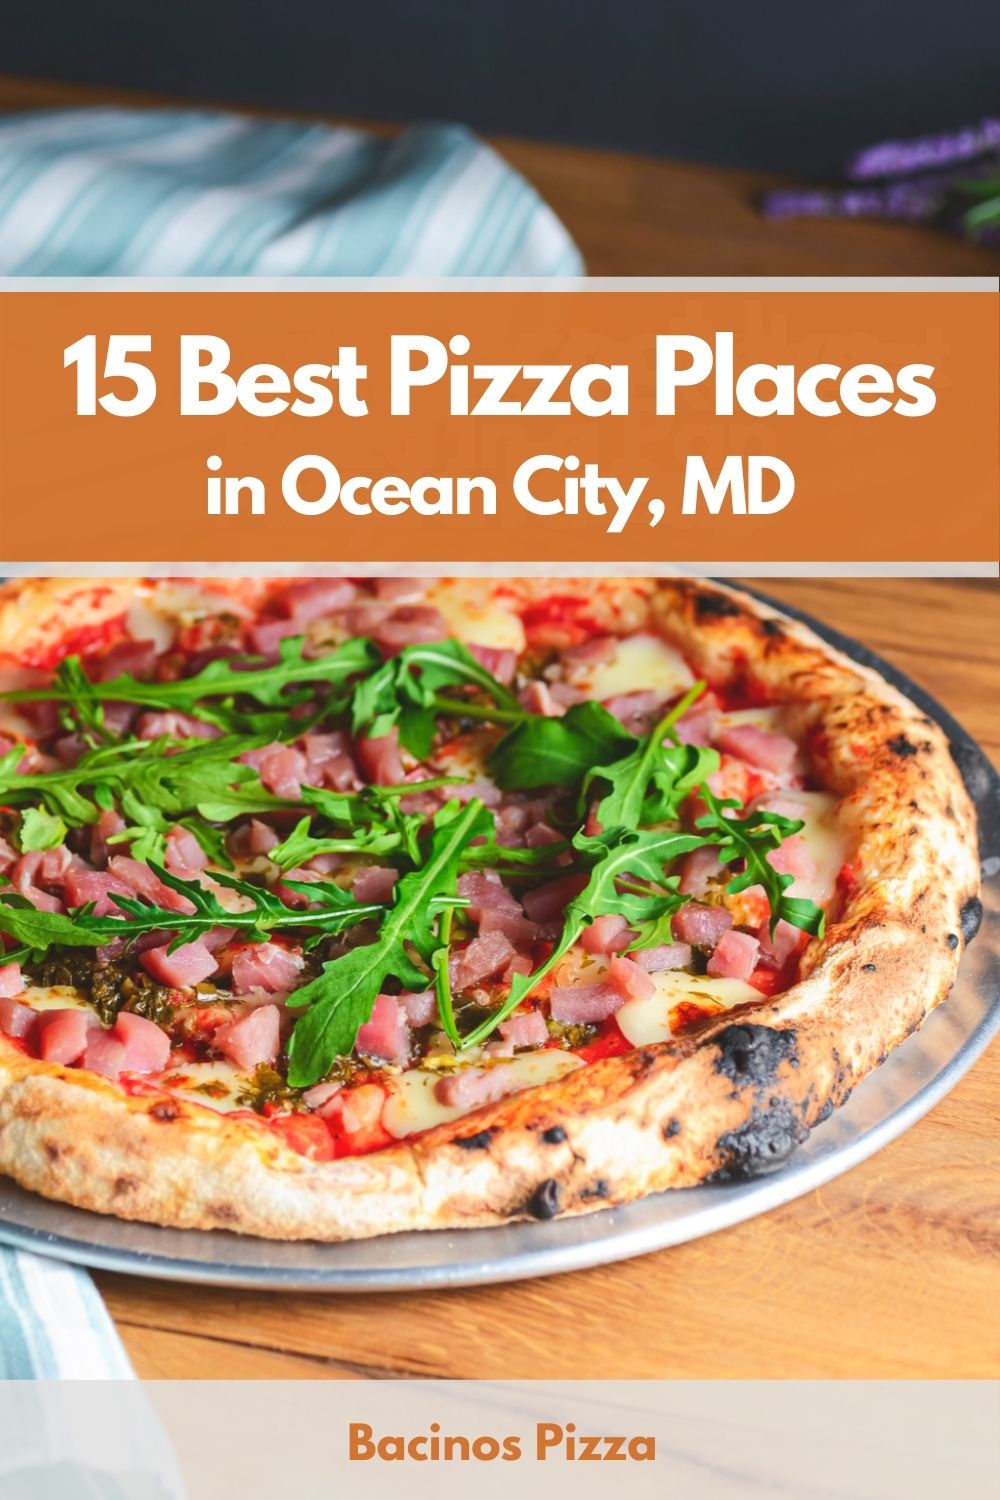 15 Best Pizza Places in Ocean City, MD pin